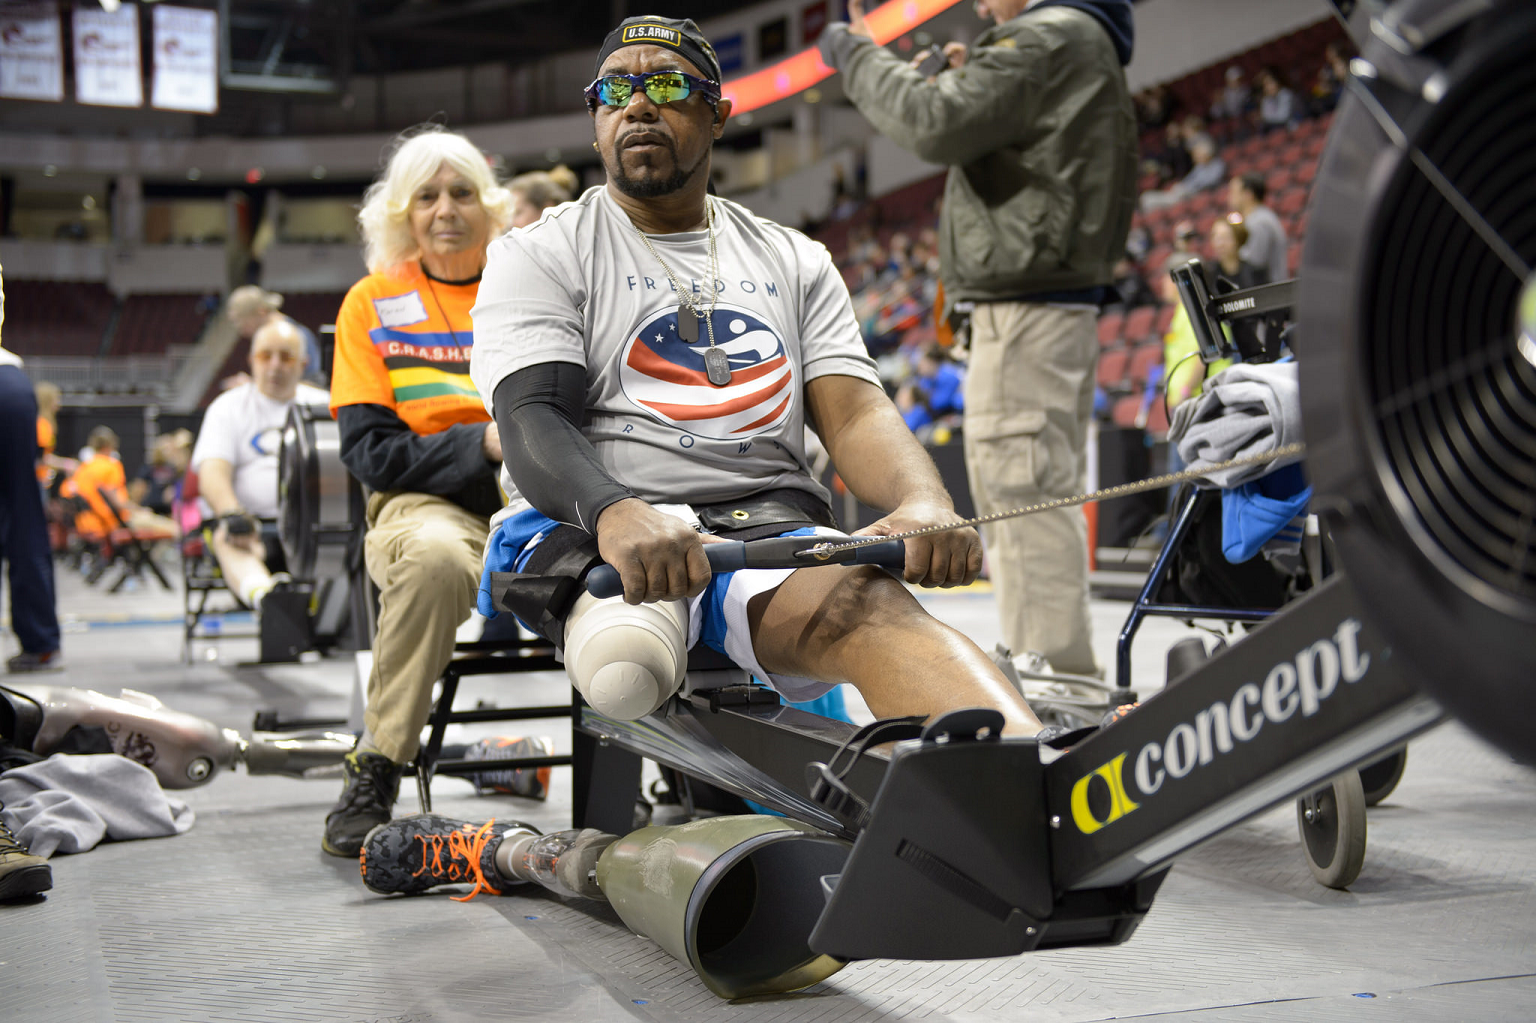 USRowing receive adaptive sports grant to boost Freedom Rows project